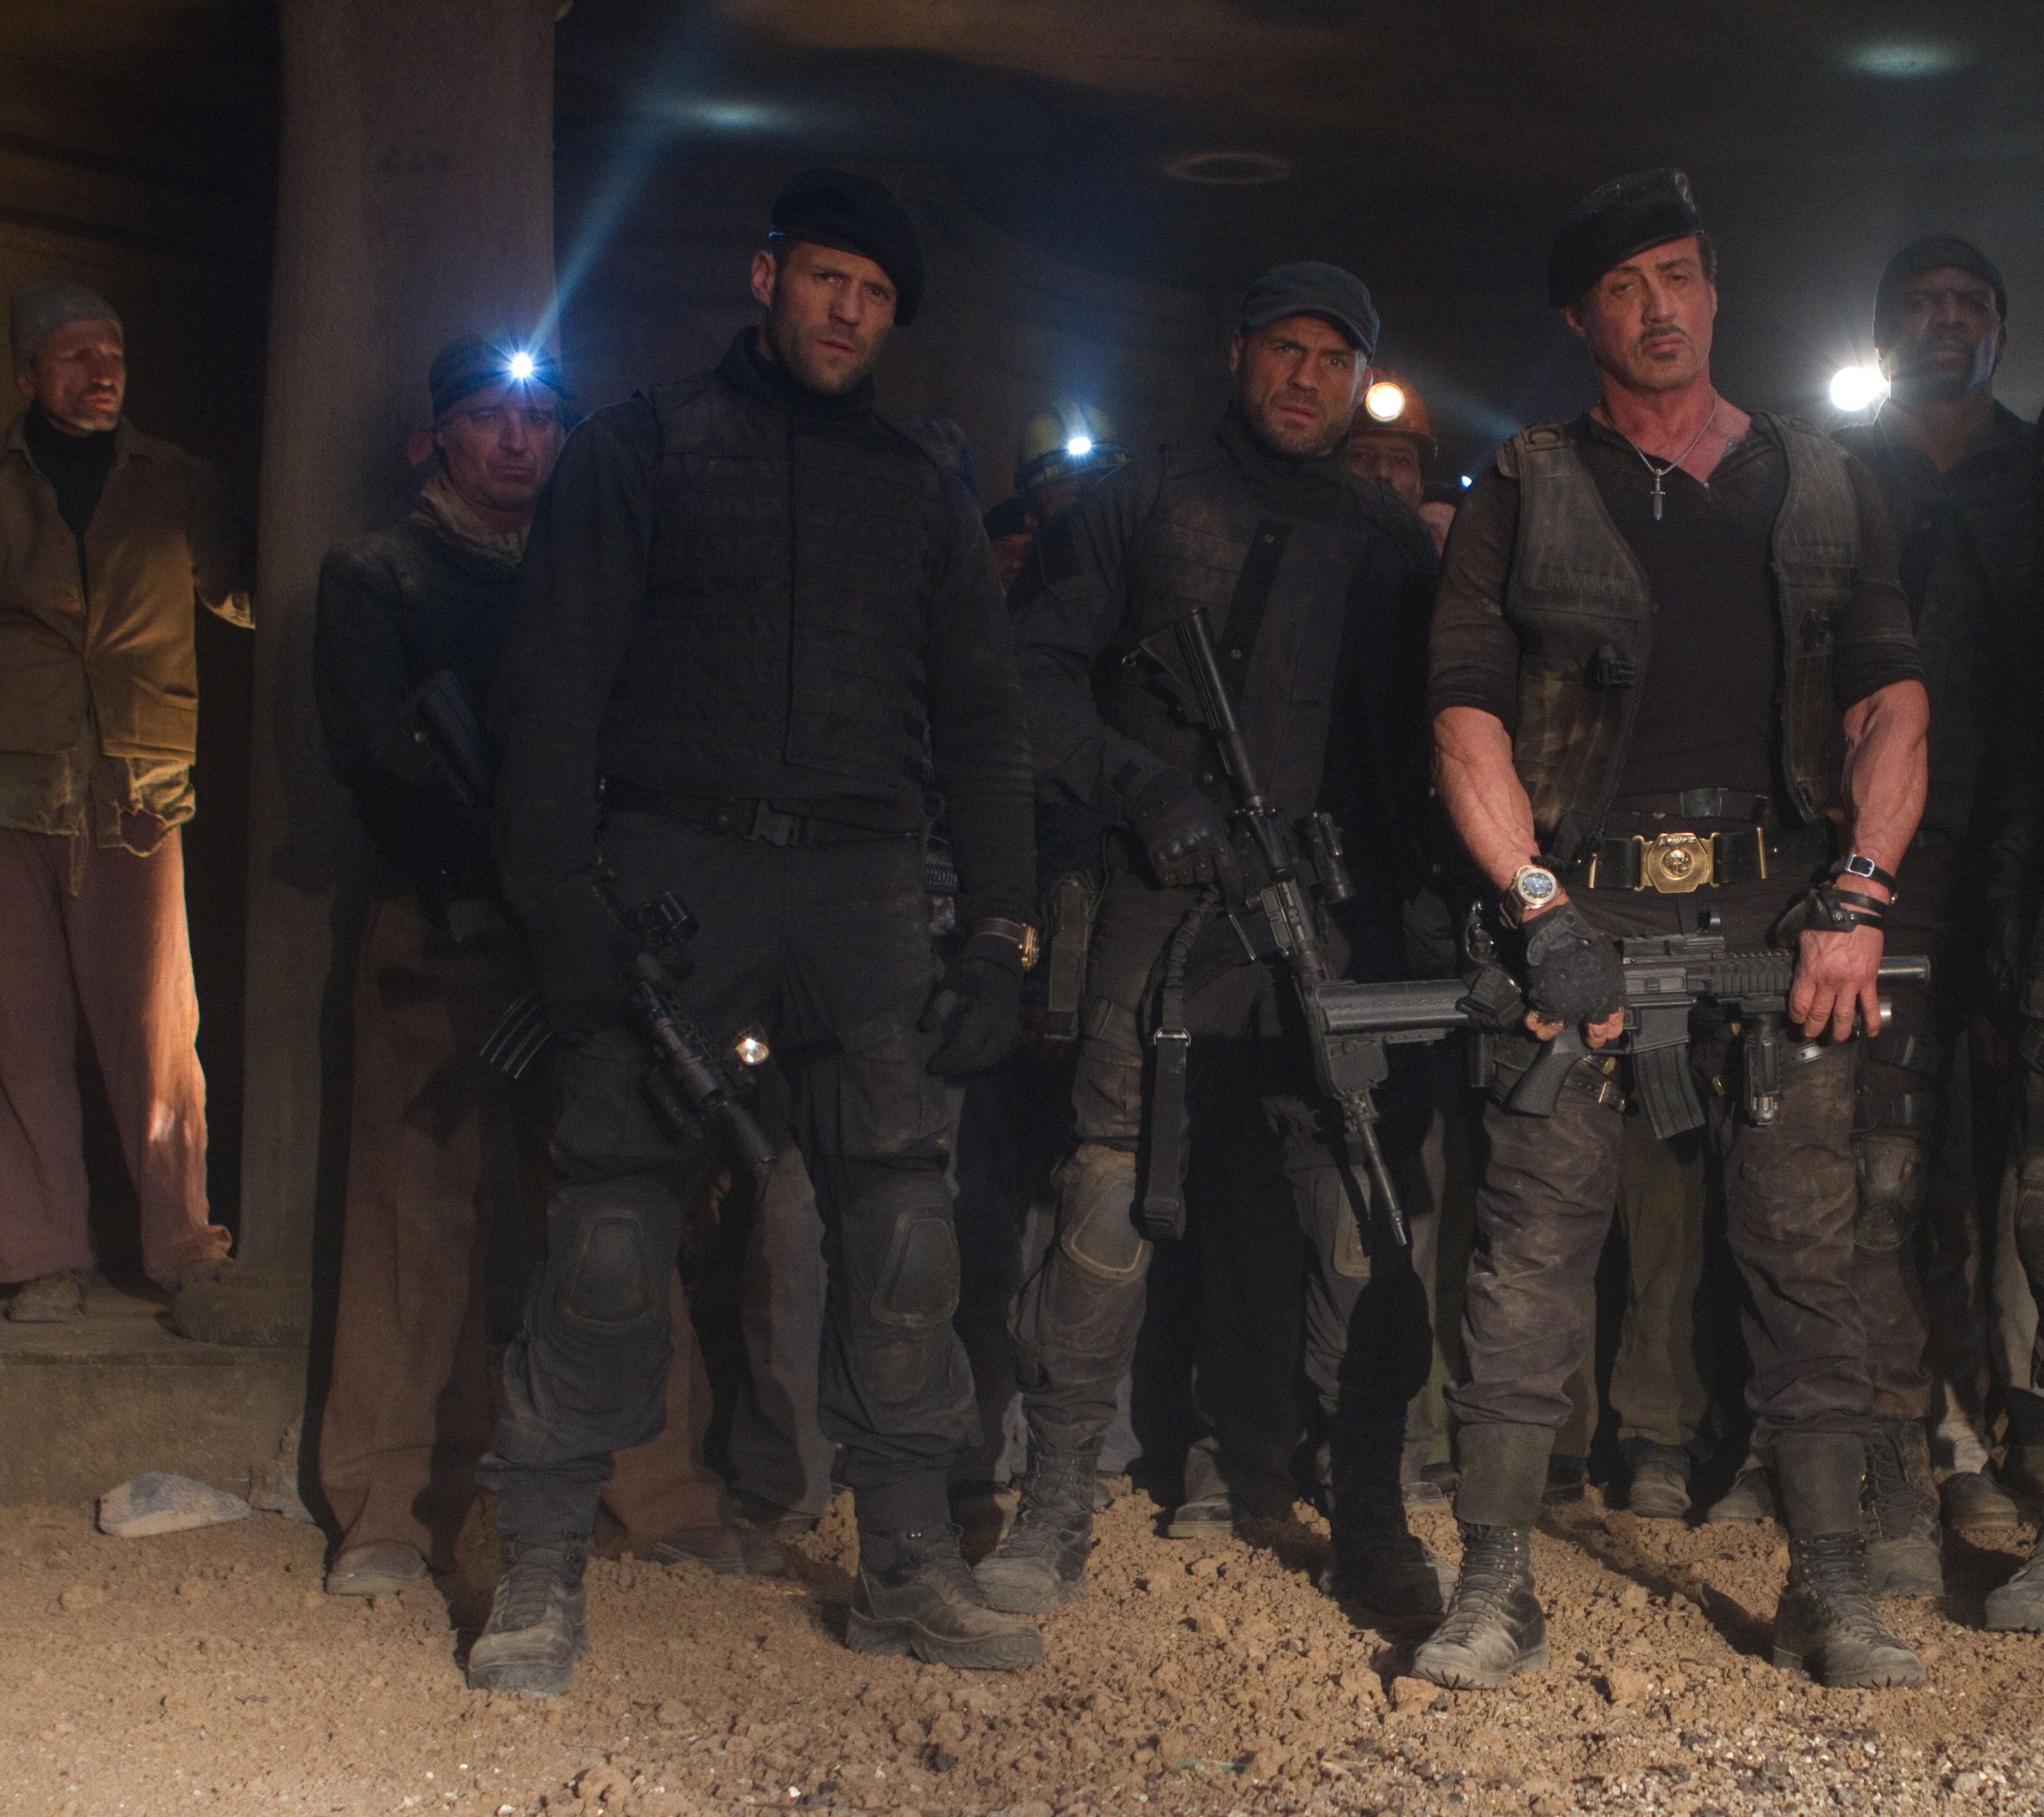 movie, the expendables 2, randy couture, sylvester stallone, dolph lundgren, jason statham, terry crews, hale caesar, barney ross, lee christmas, gunnar jensen, toll road, nan yu, maggie (the expendables), the expendables